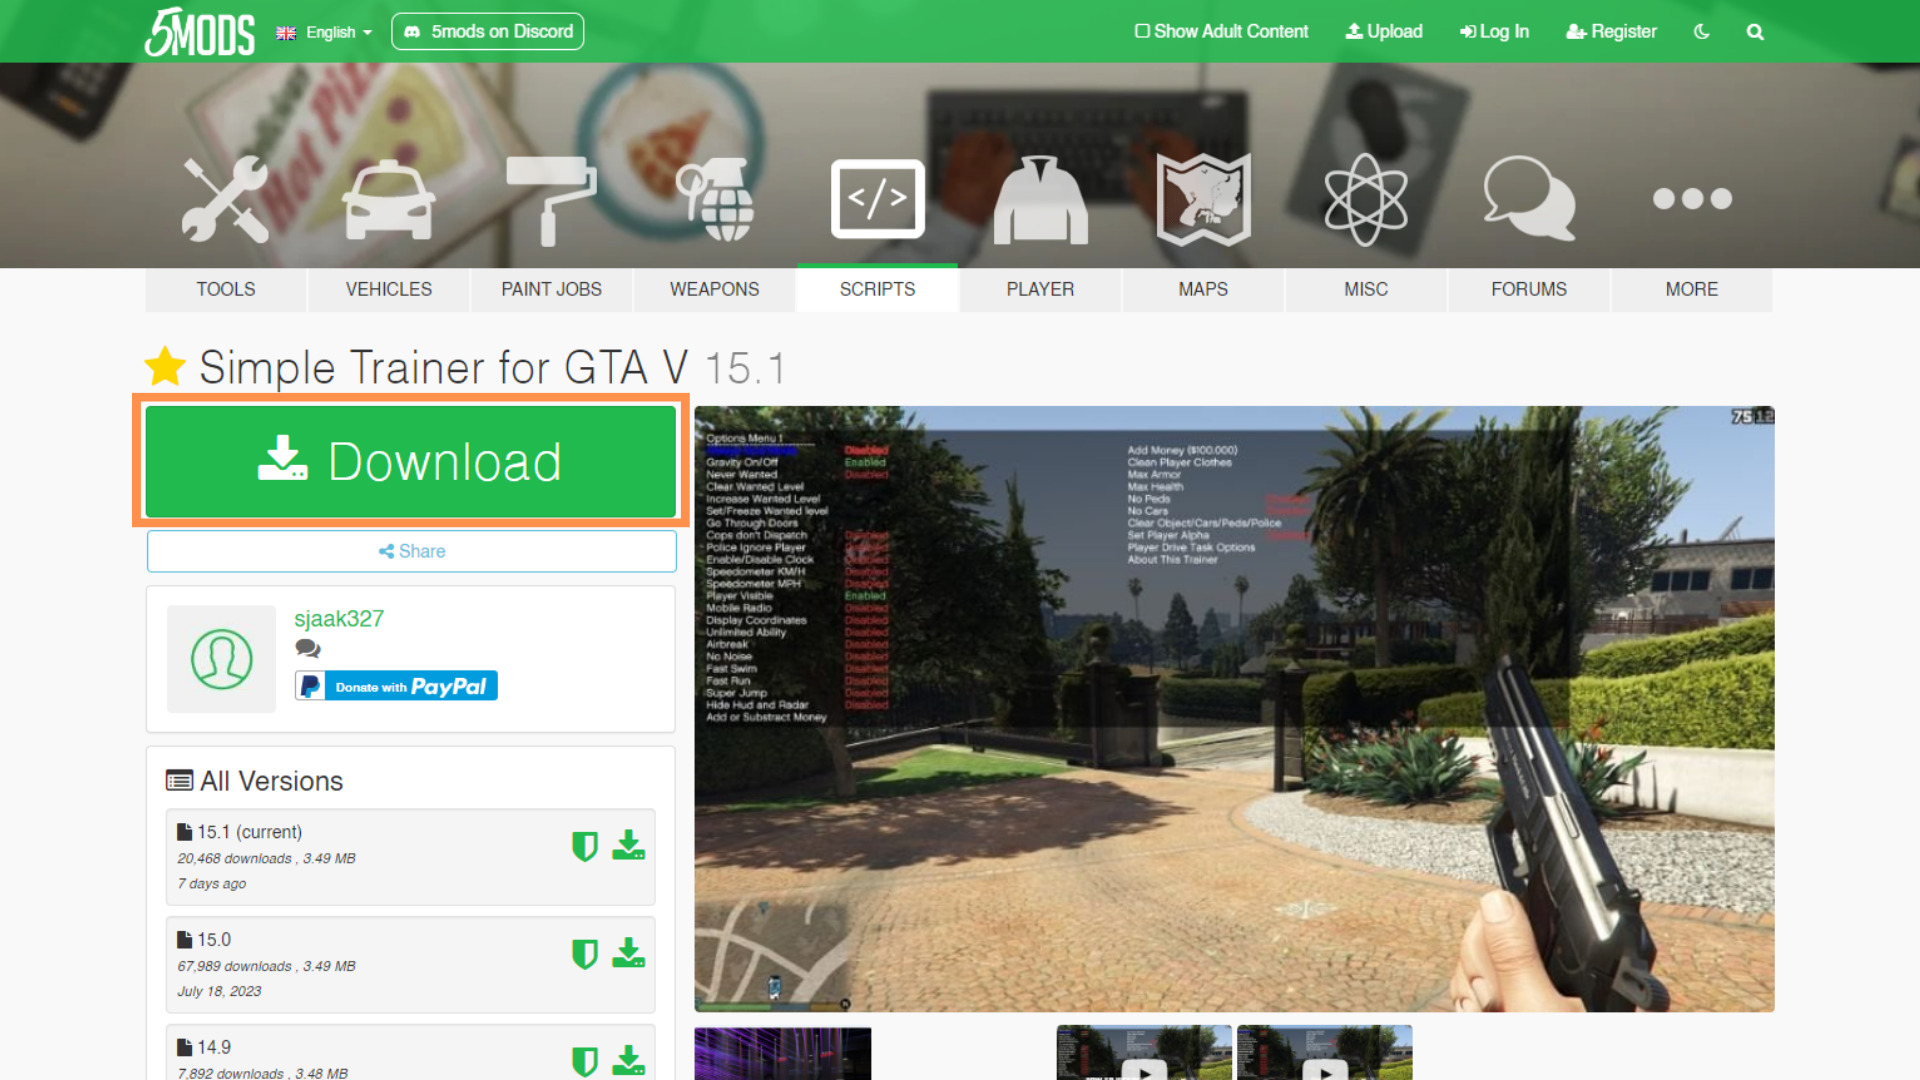 Download Simple Trainer for GTA V to use Trainers